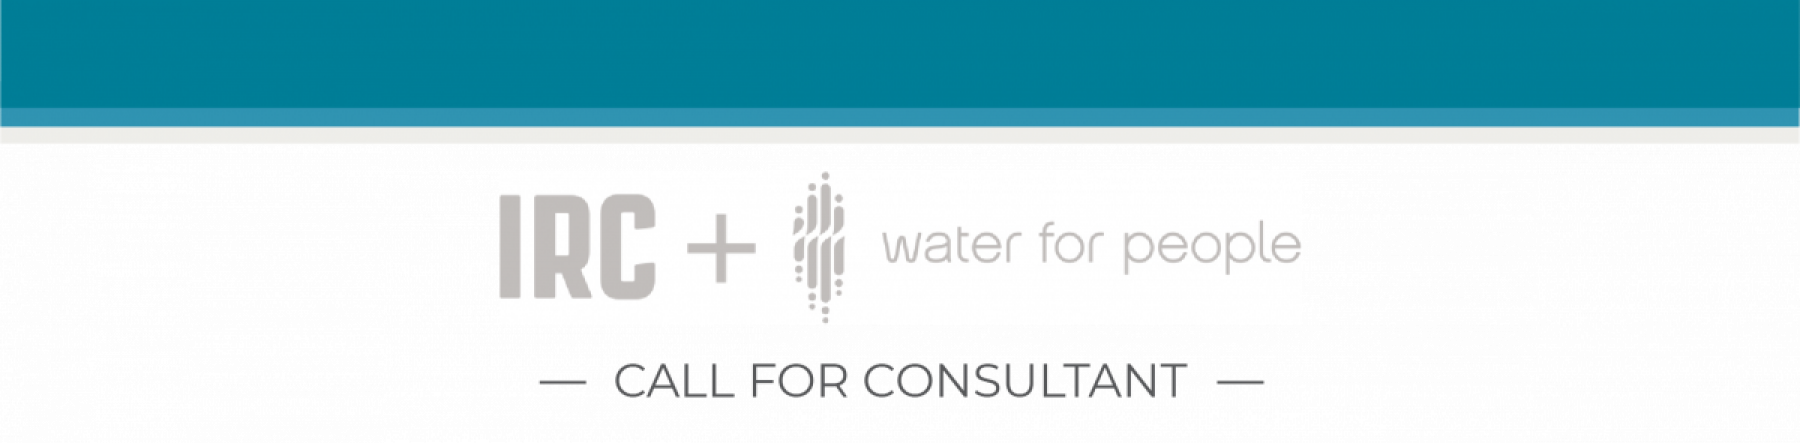 Call for Consultant